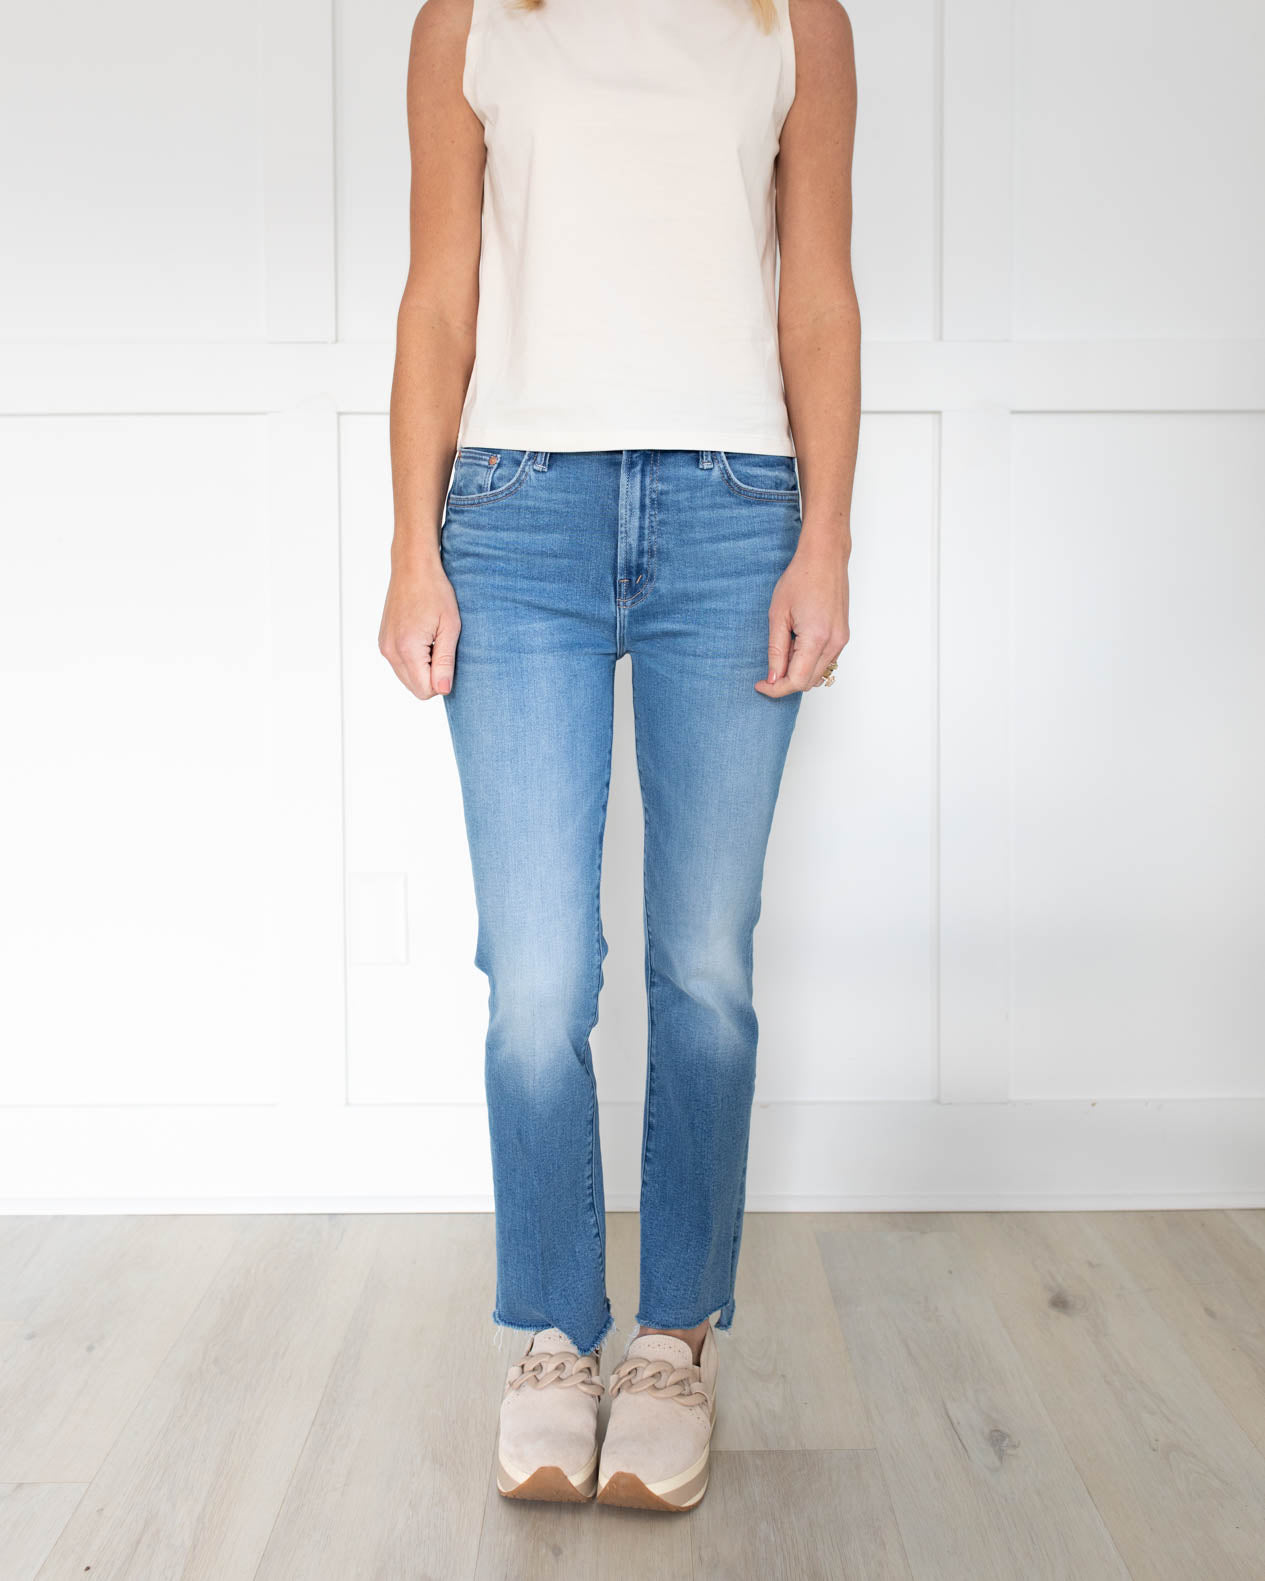 The Insider Crop Step Fray Denim in Out of the Blue by Mother